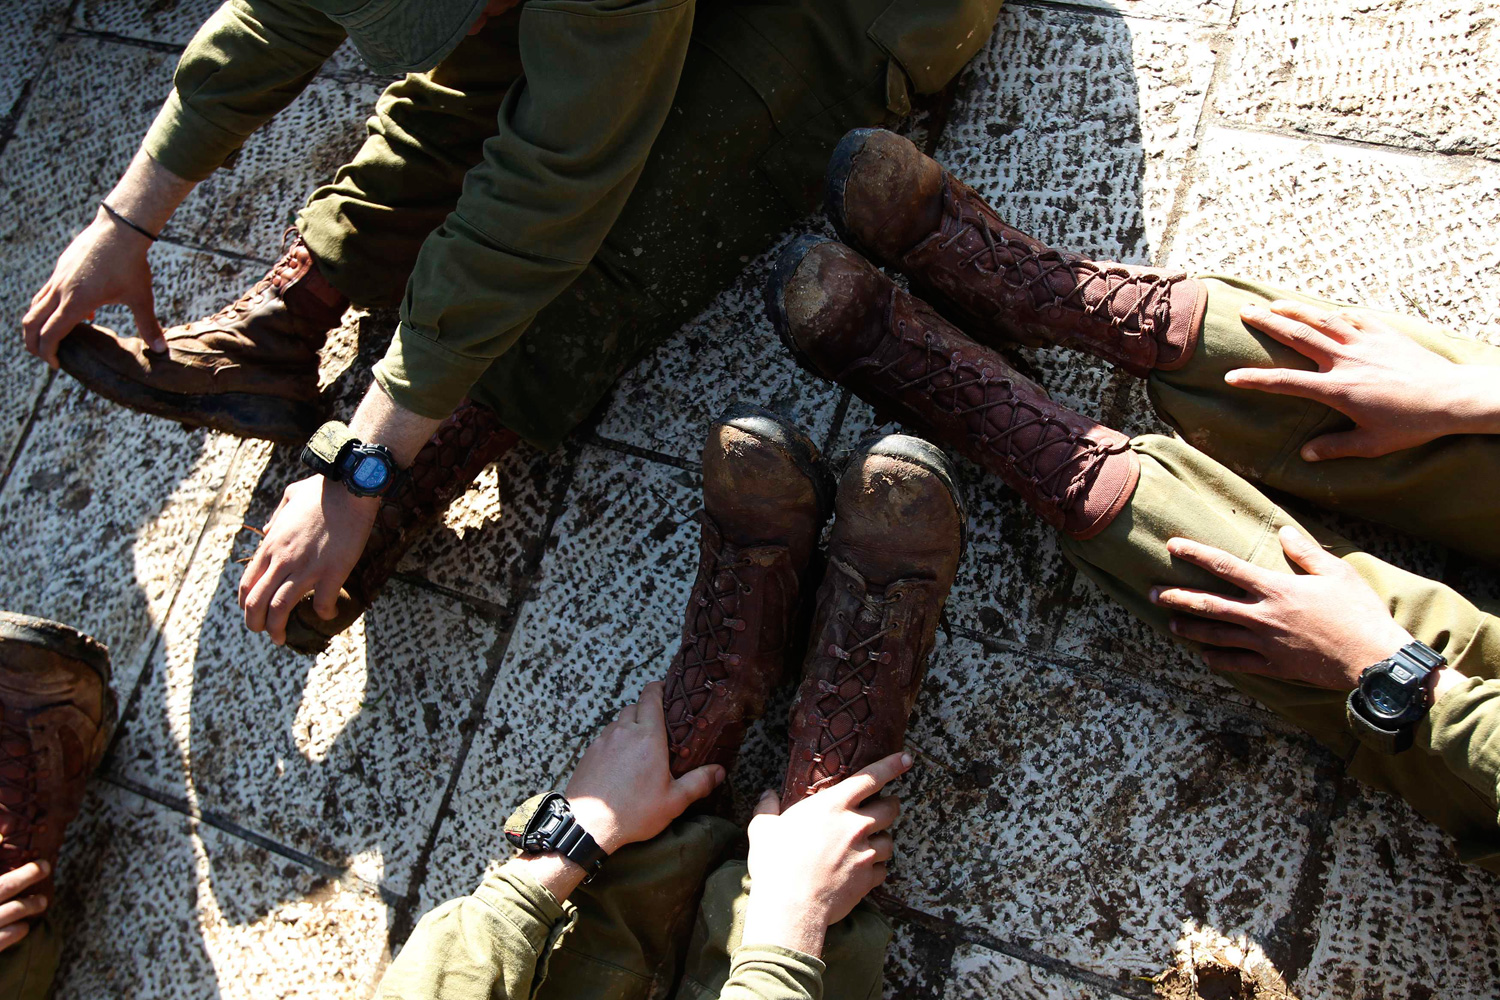 Feb. 20, 2012. Israeli soldiers stretch after completing an overnight march in Jerusalem.